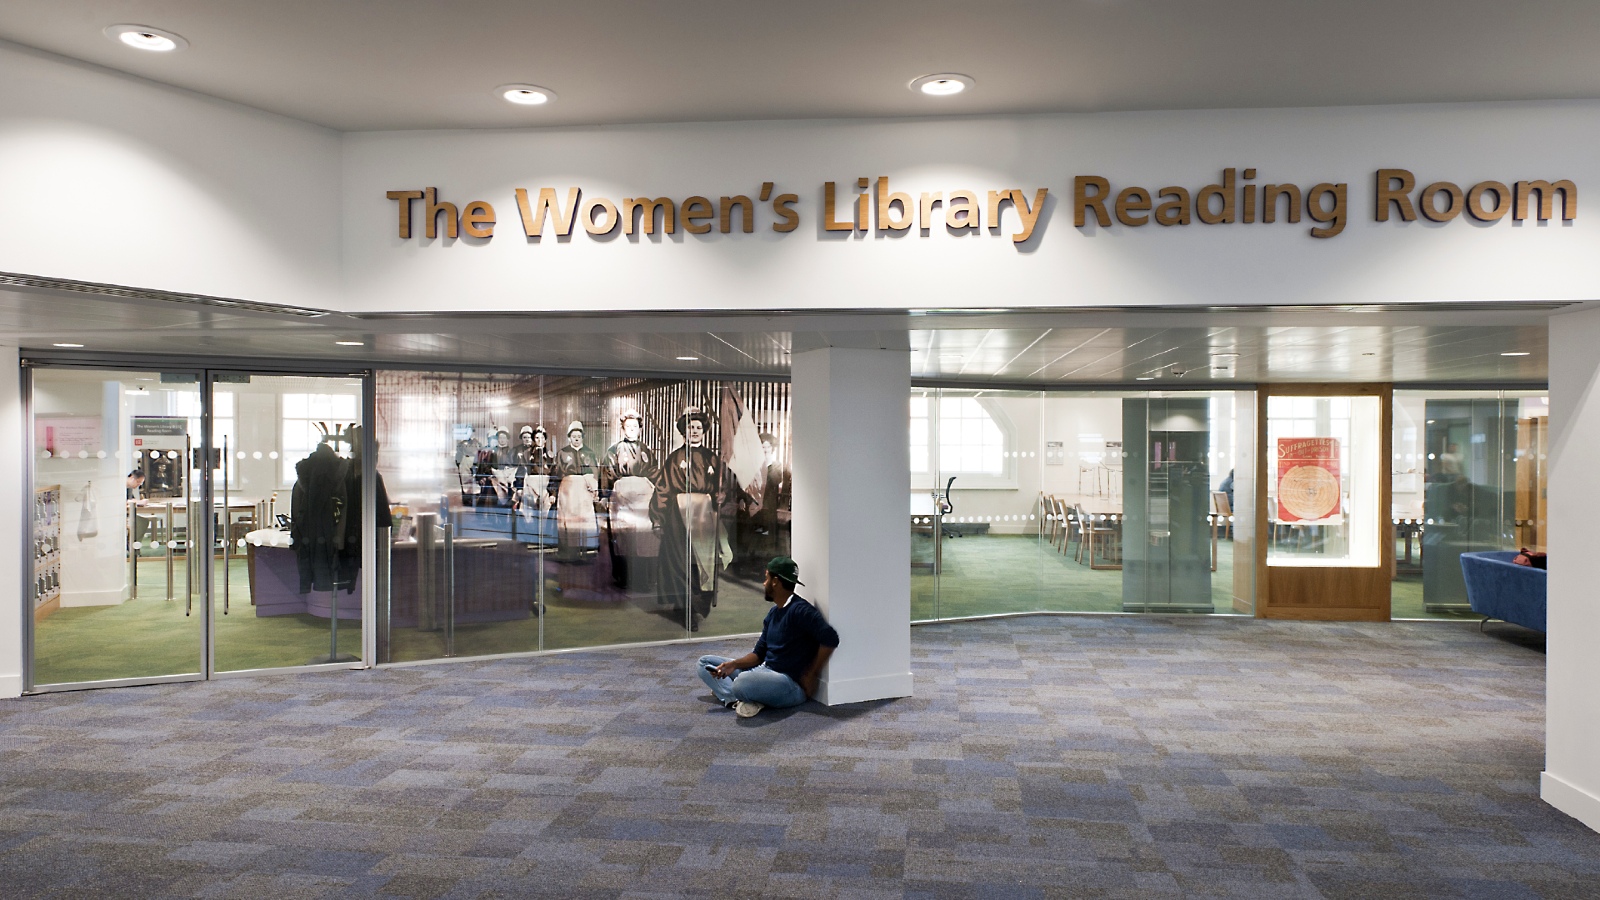 A view on the 4th floor of the Library outside and looking into The Women's Library Reading Room. A student is seated on the floor.